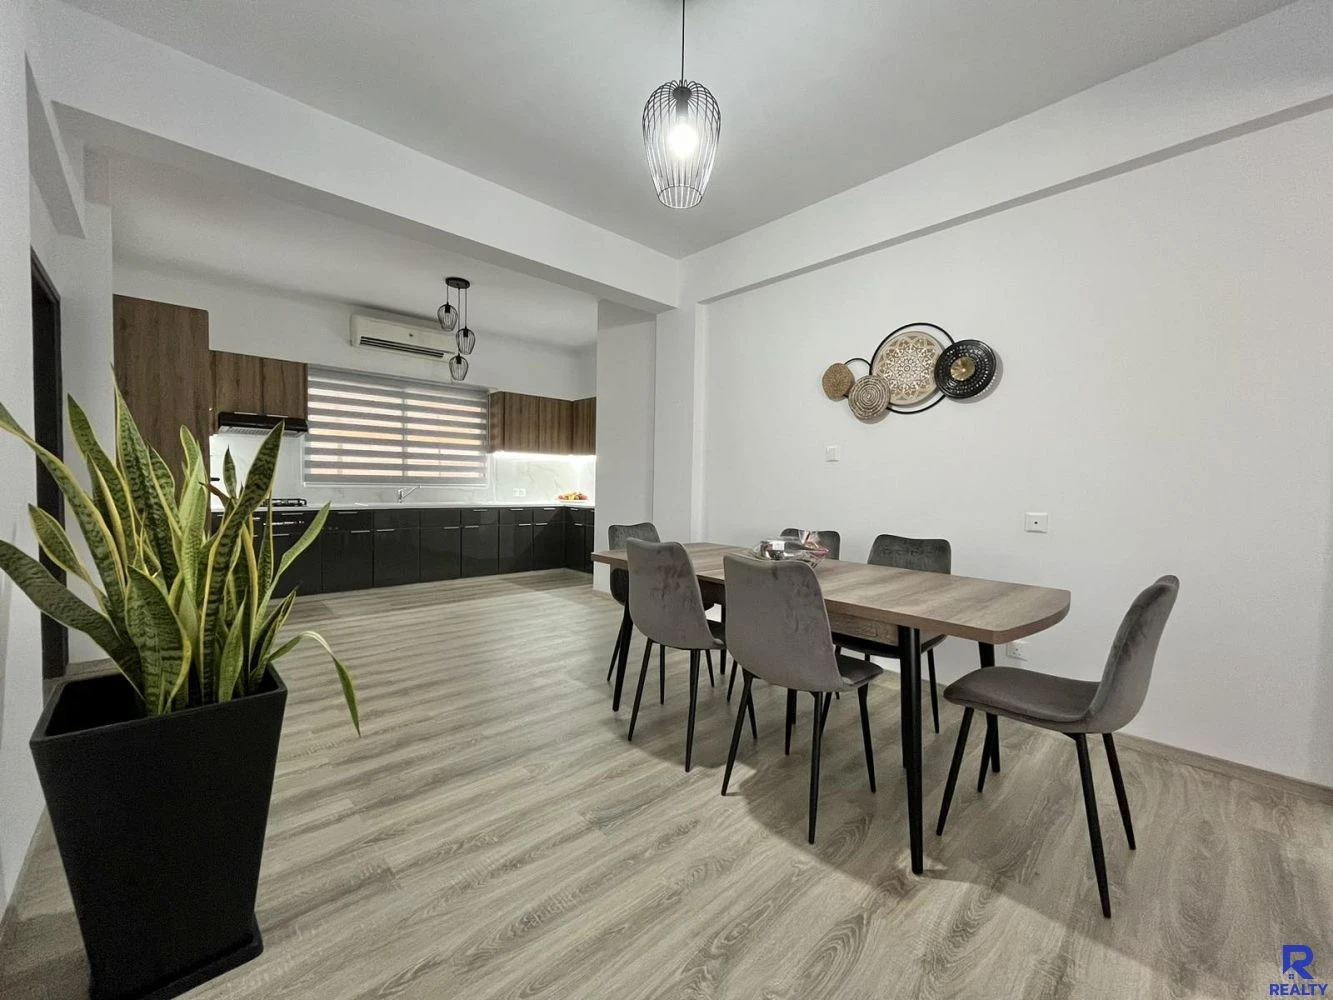 Renovated 2 bdr house for rent in Limassol, image 1